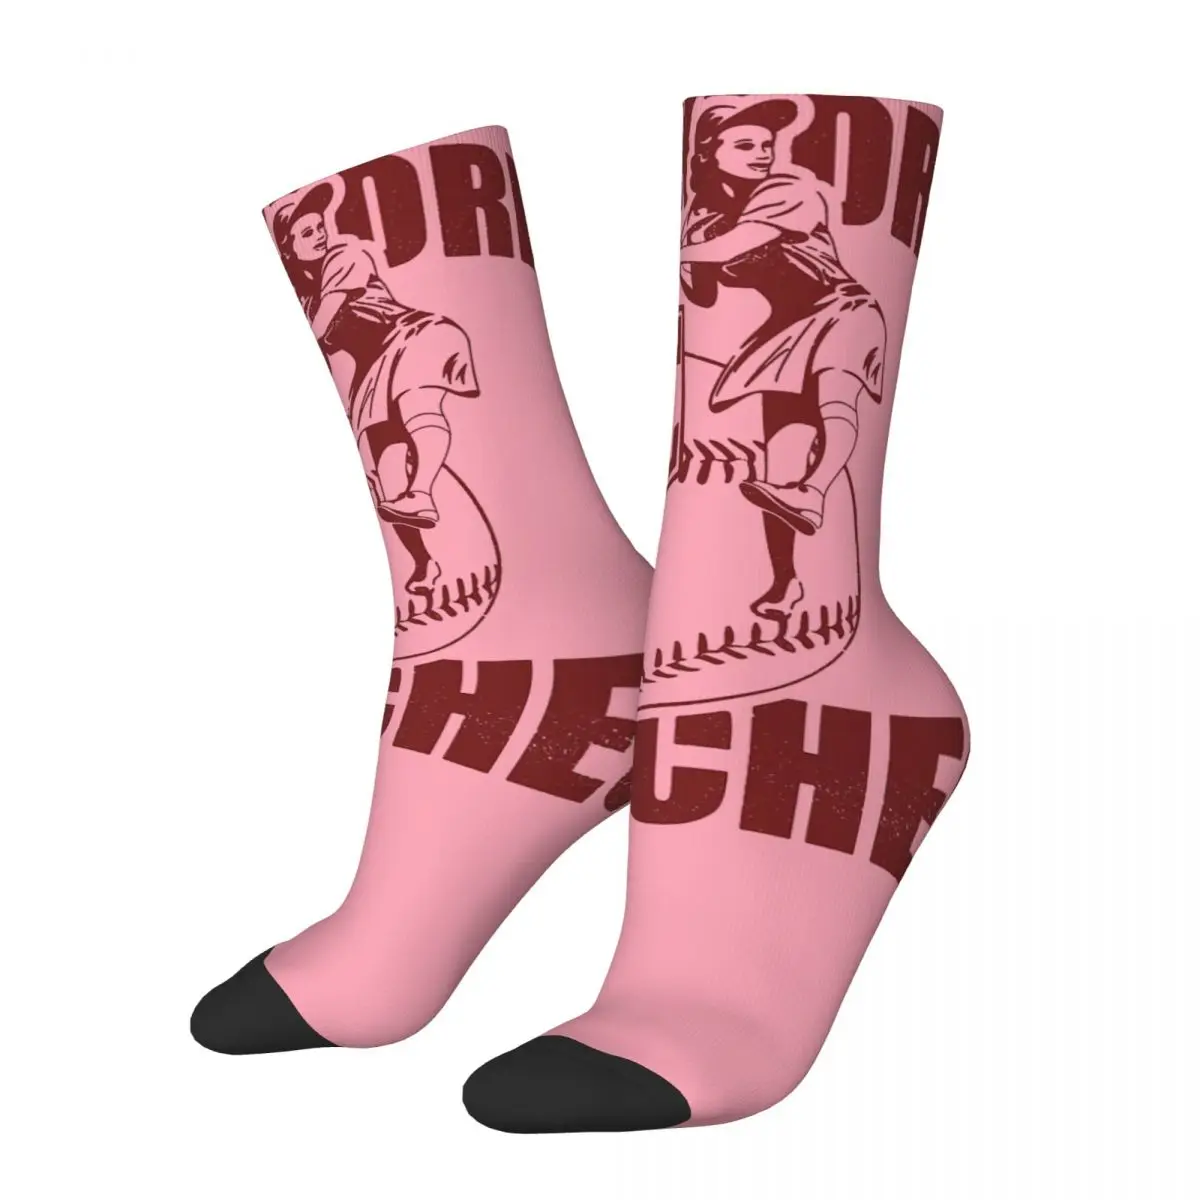 

Hip Hop Vintage Peach Crazy compression Socks Unisex A League Of Their Own Tom Hanks Seamless Printed Funny Novelty Crew Sock